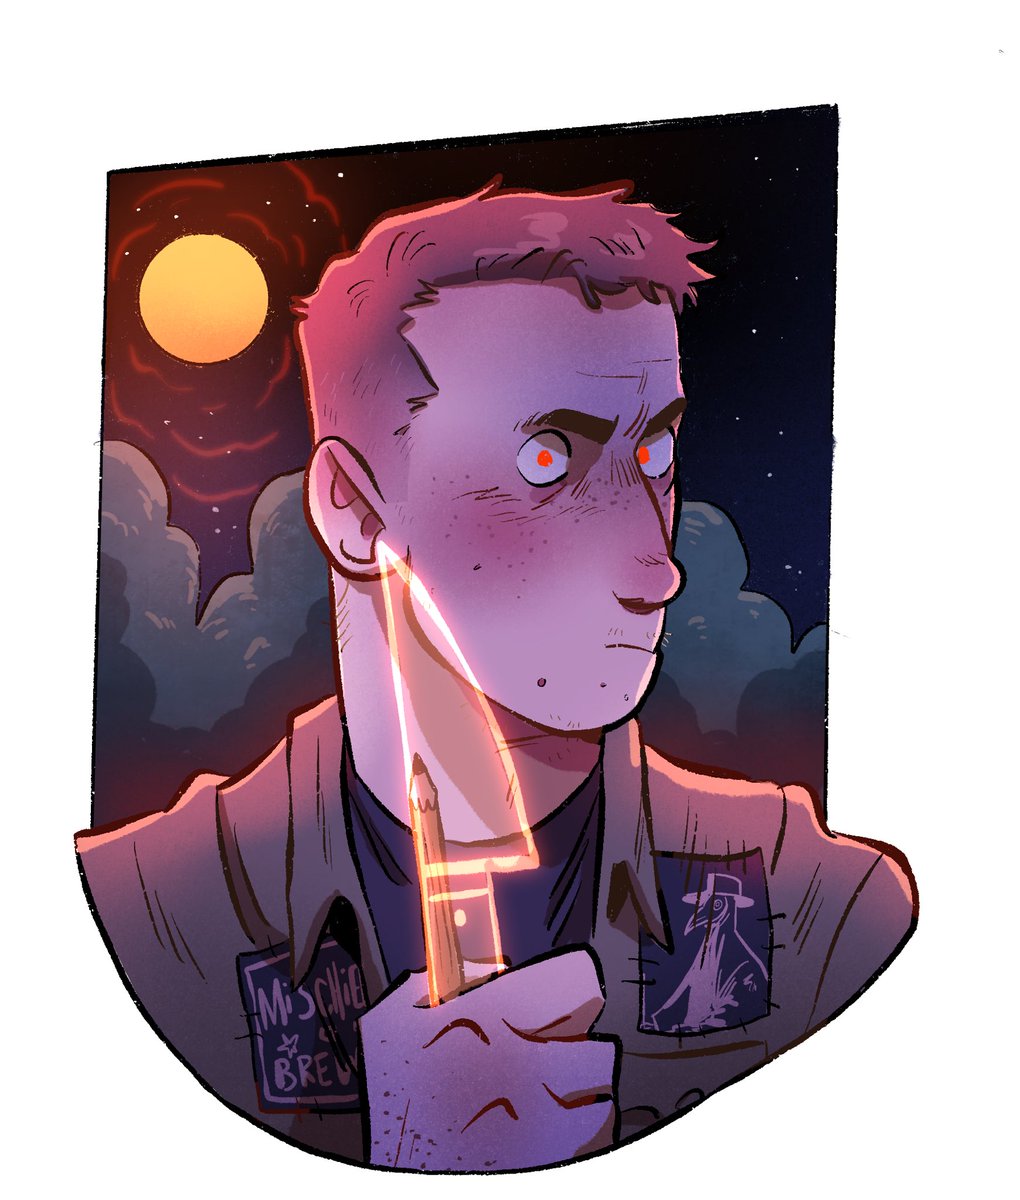 「some new SpOoKy matching icons for me an」|george williams🏁🦖🏳️‍⚧️のイラスト